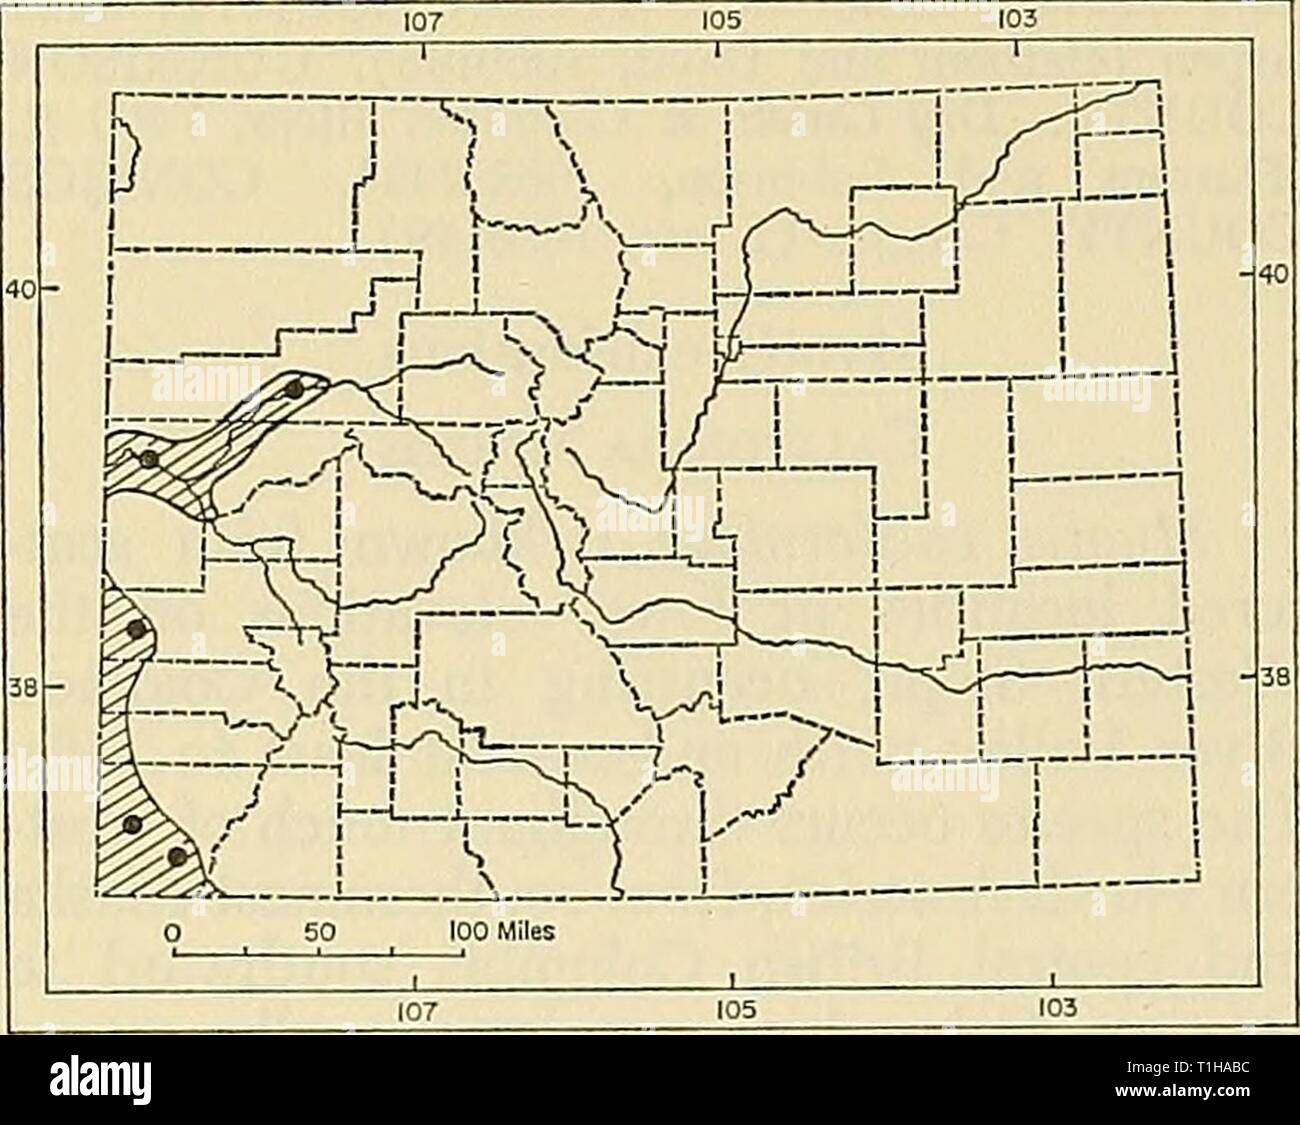 Distribution of mammals in Colorado Distribution of mammals in Colorado  distributionofma31972arms Year: 1972  64 MONOGRAPH MUSEUM OF NATURAL HISTORY NO. 3    Fig. 22. Distribution of Myotis califomicus ste- phensi in Colorado. For explanation of symbols, see p. 9. from Bedrock, Montrose County, are: 75, 33, 6, —, 32.0. For cranial measurements, see table 3. Remarks. — Stephens (1900) selected as the holotype of Myotis californicus pallidus a specimen (male, original number 2498, F. Stephens) from Vallecito, California (now USNM 99829). The holotype has had a rather involved history, reviewed  Stock Photo